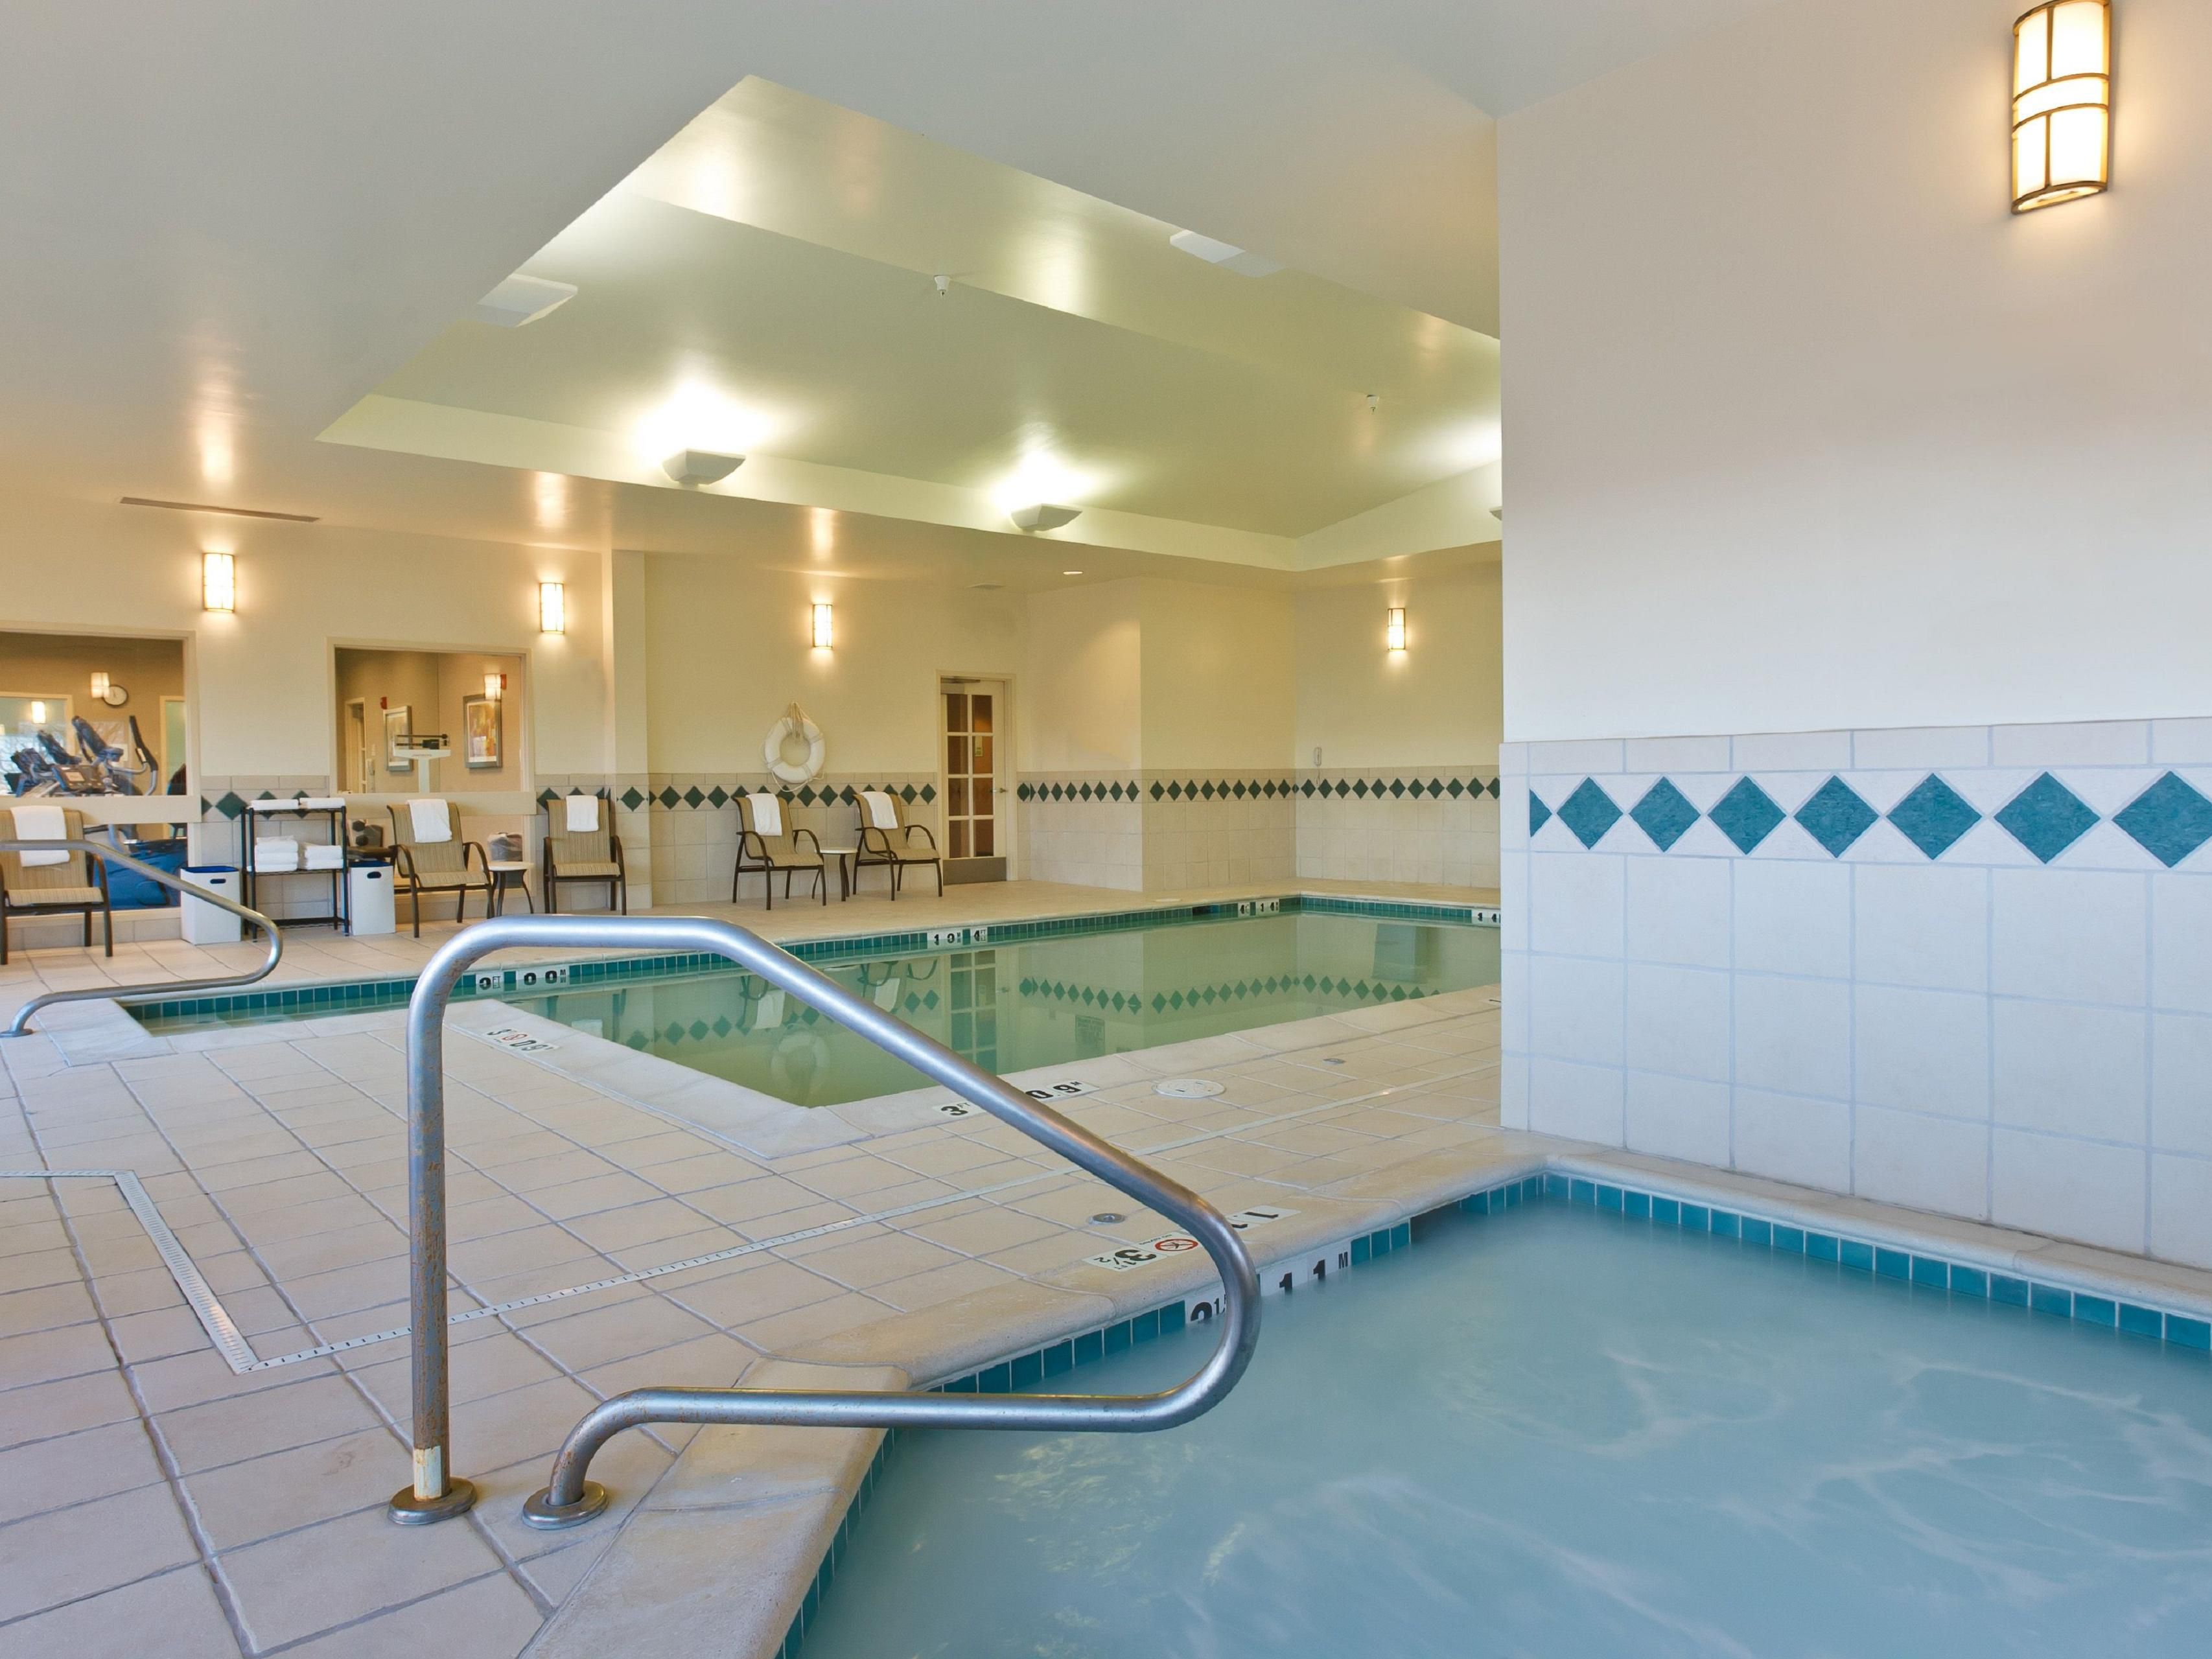 A great way to relax after a busy day. Enjoy a splash in the Pool and Spa